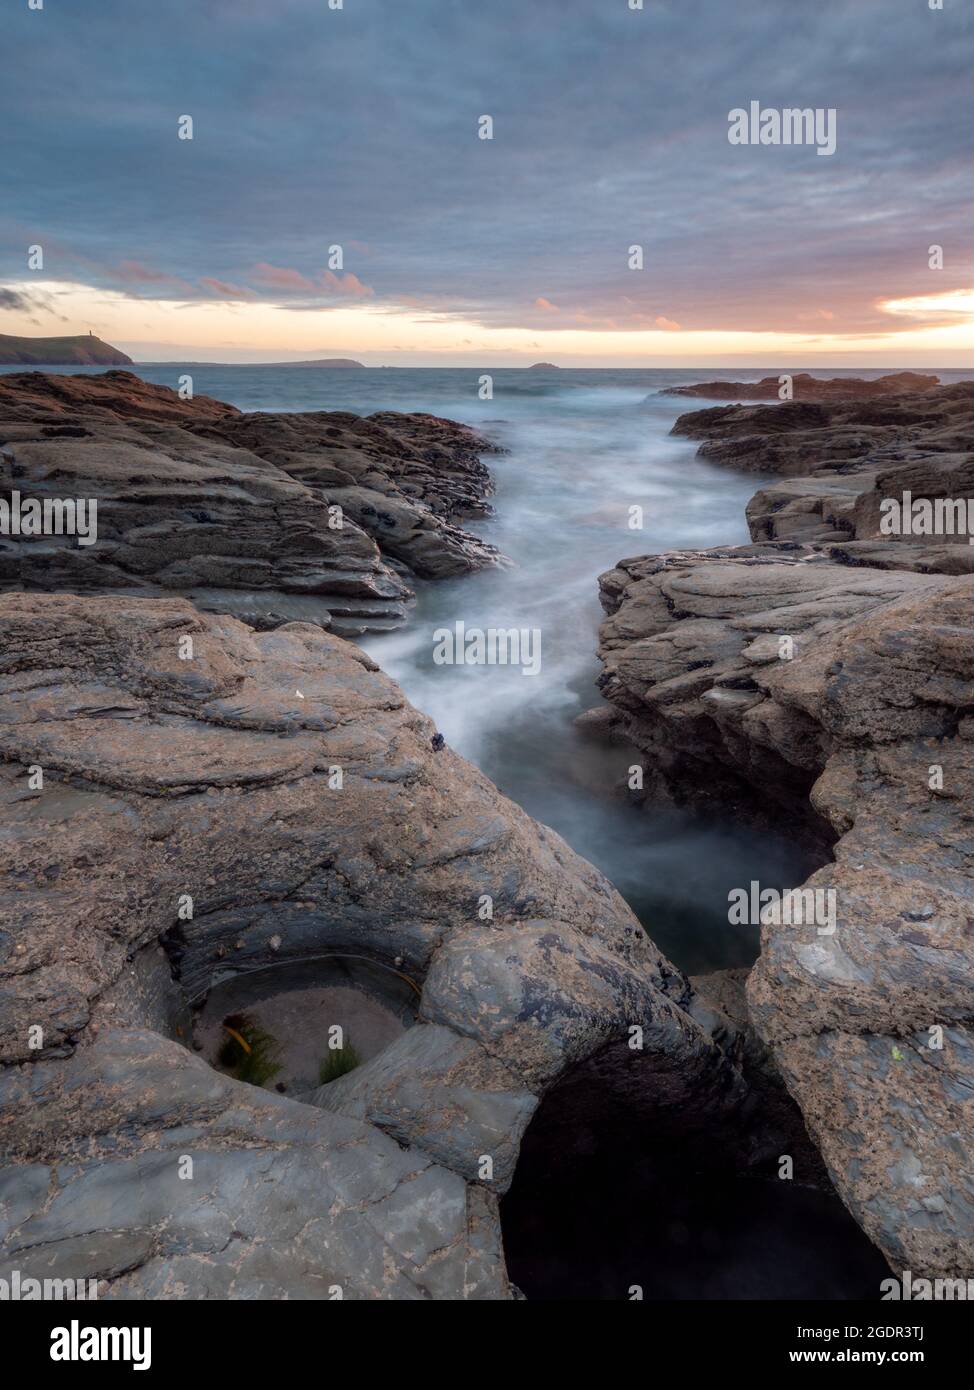 Water streaming into a channel in the slate ledges of the North Cornwall coast at sunset Stock Photo